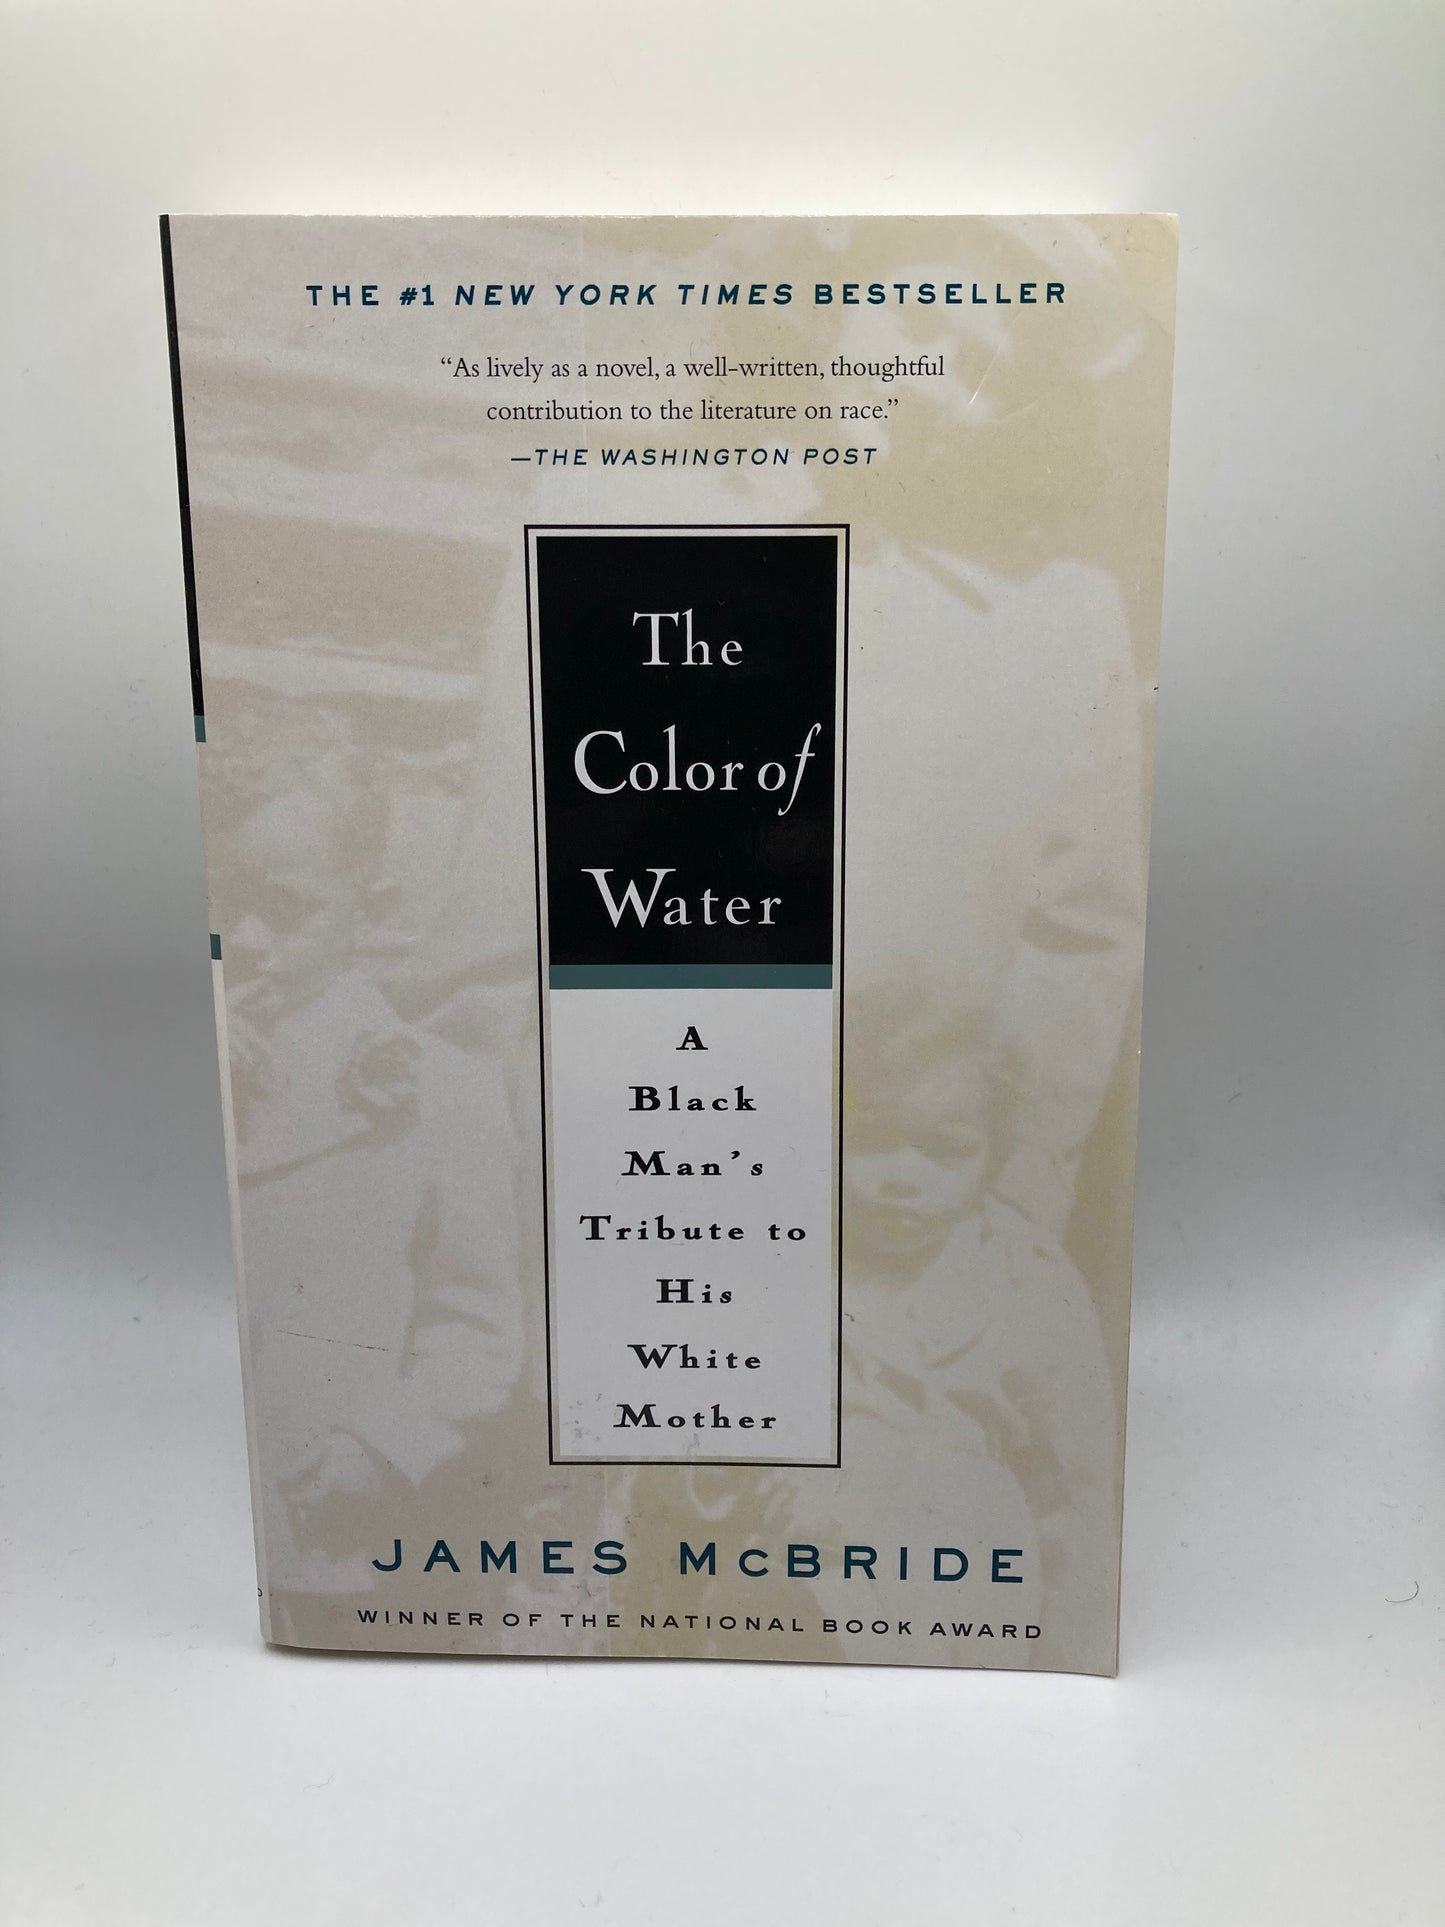 The Color of Water: A Black Man's tribute to His White Mother by James Mcbride